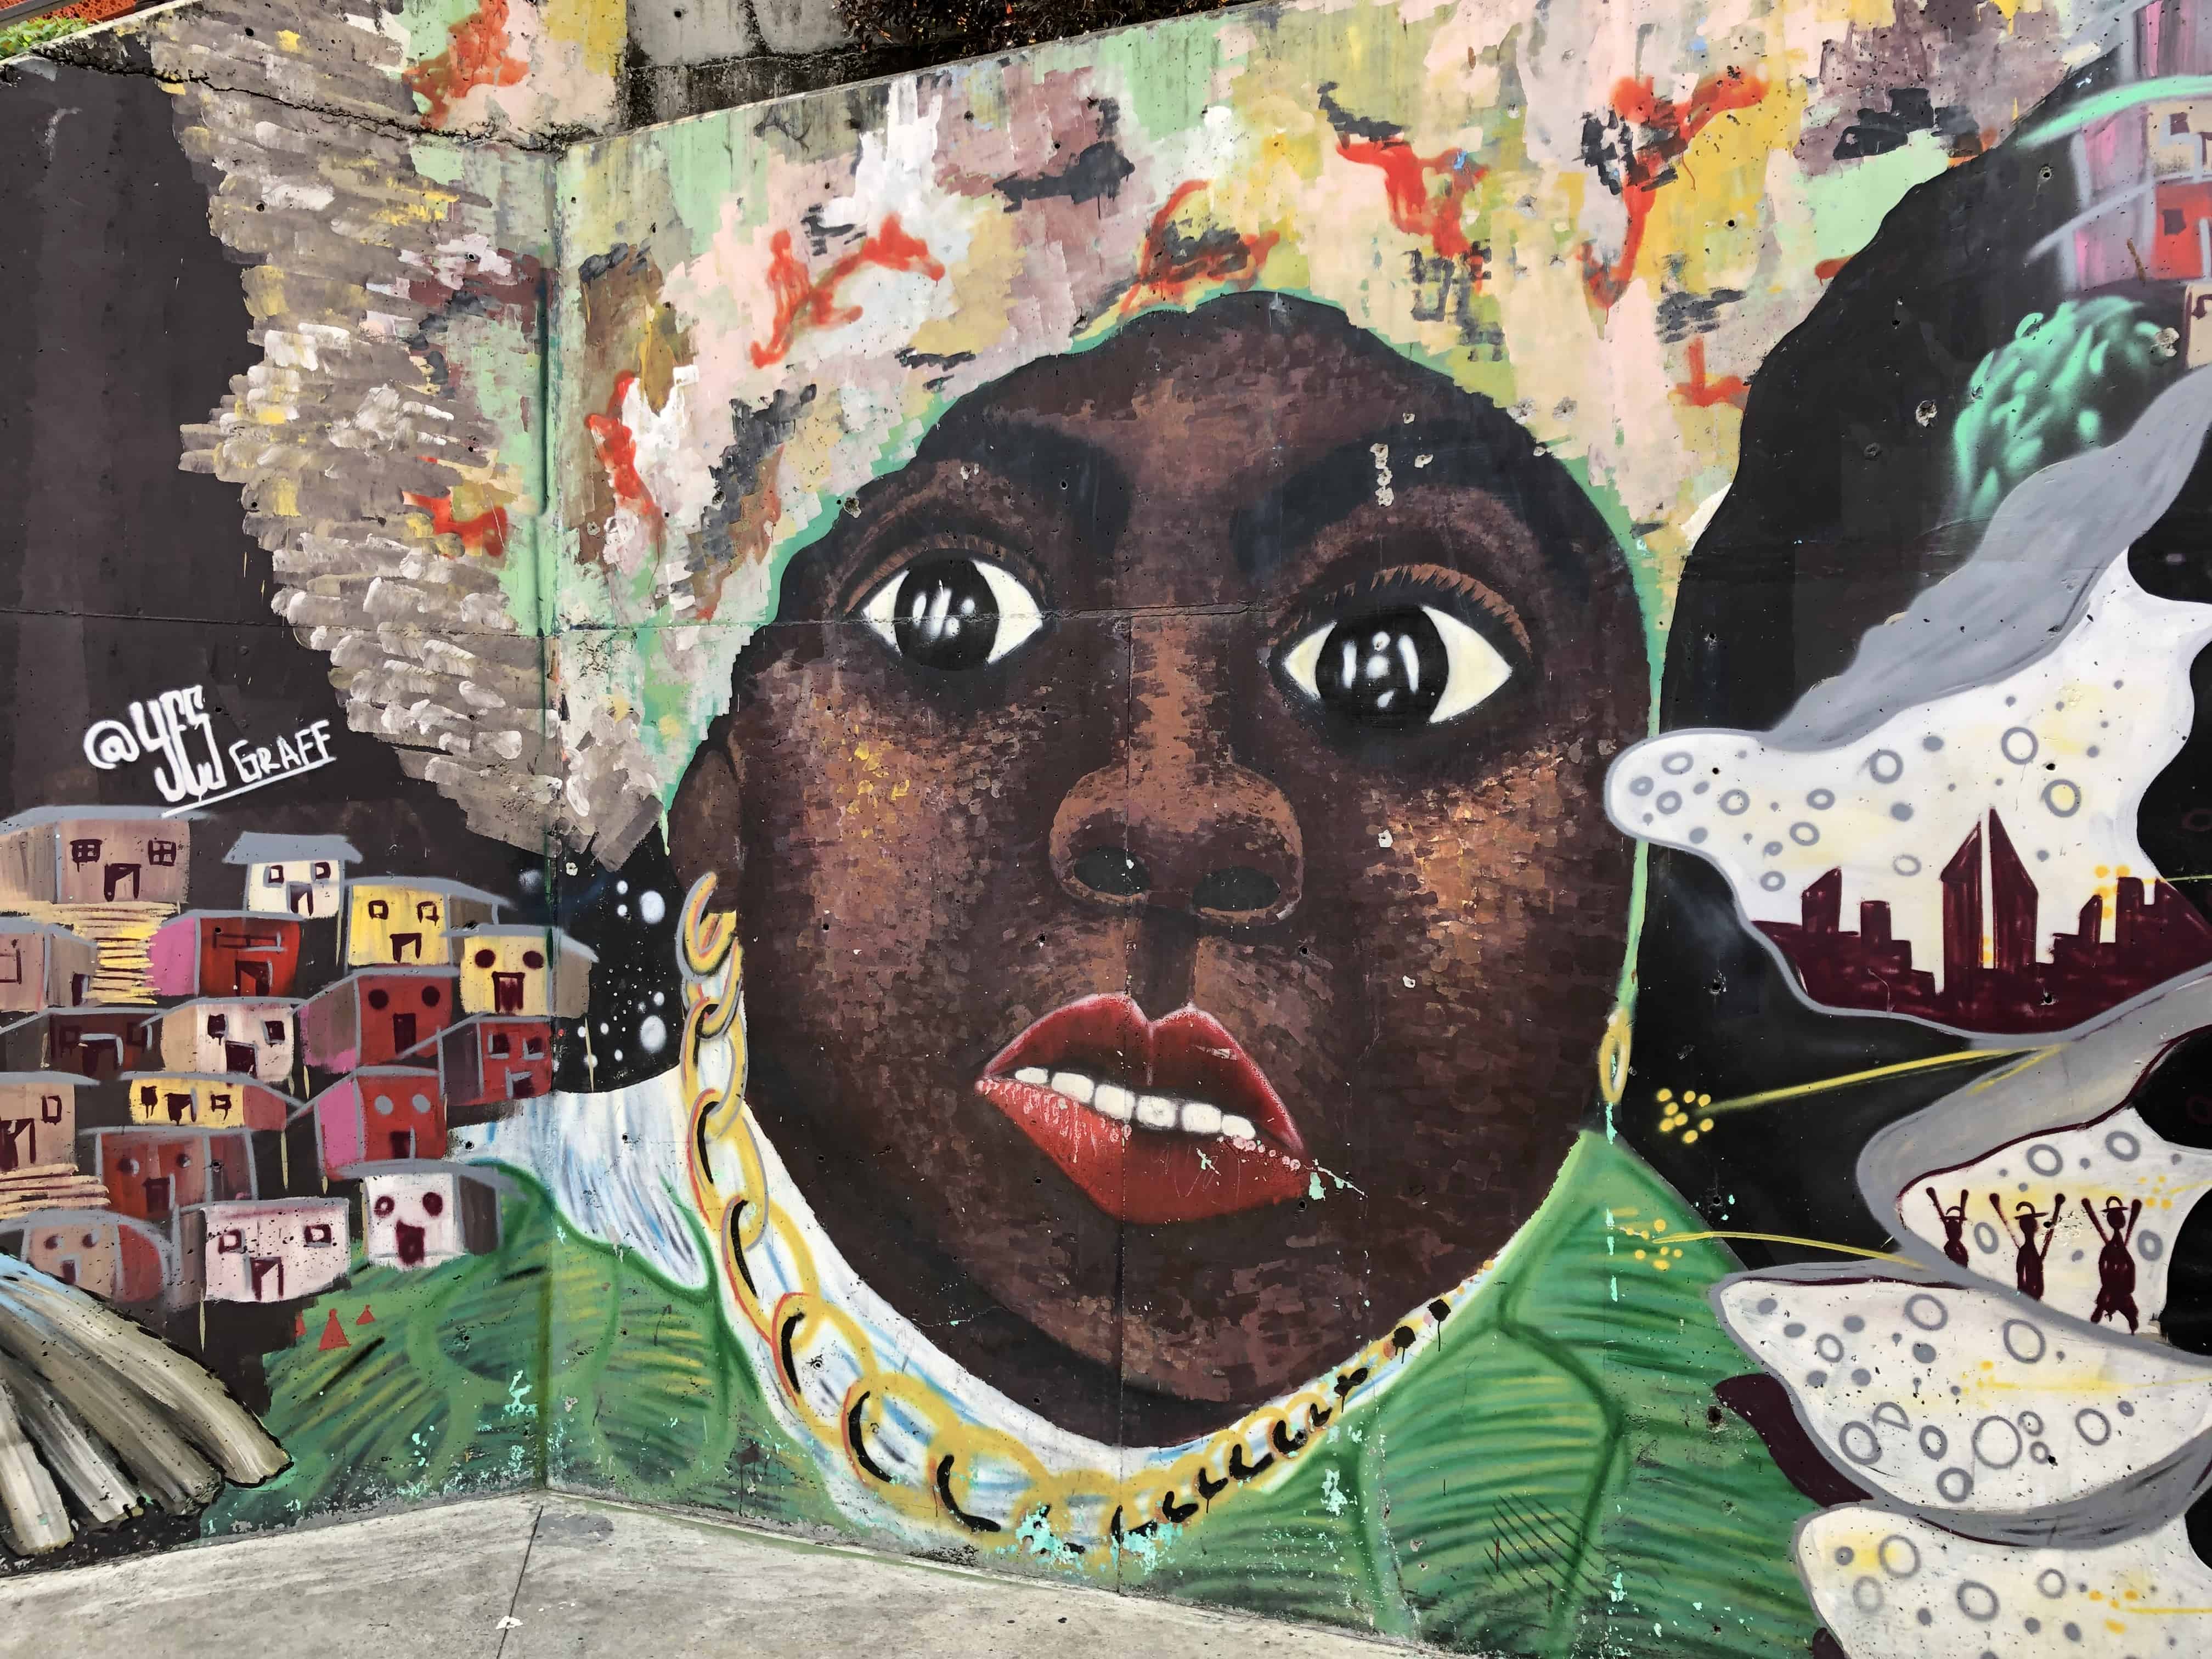 Representation of the Afro-Colombian residents of Comuna 13 in Comuna 13, Medellín, Antioquia, Colombia